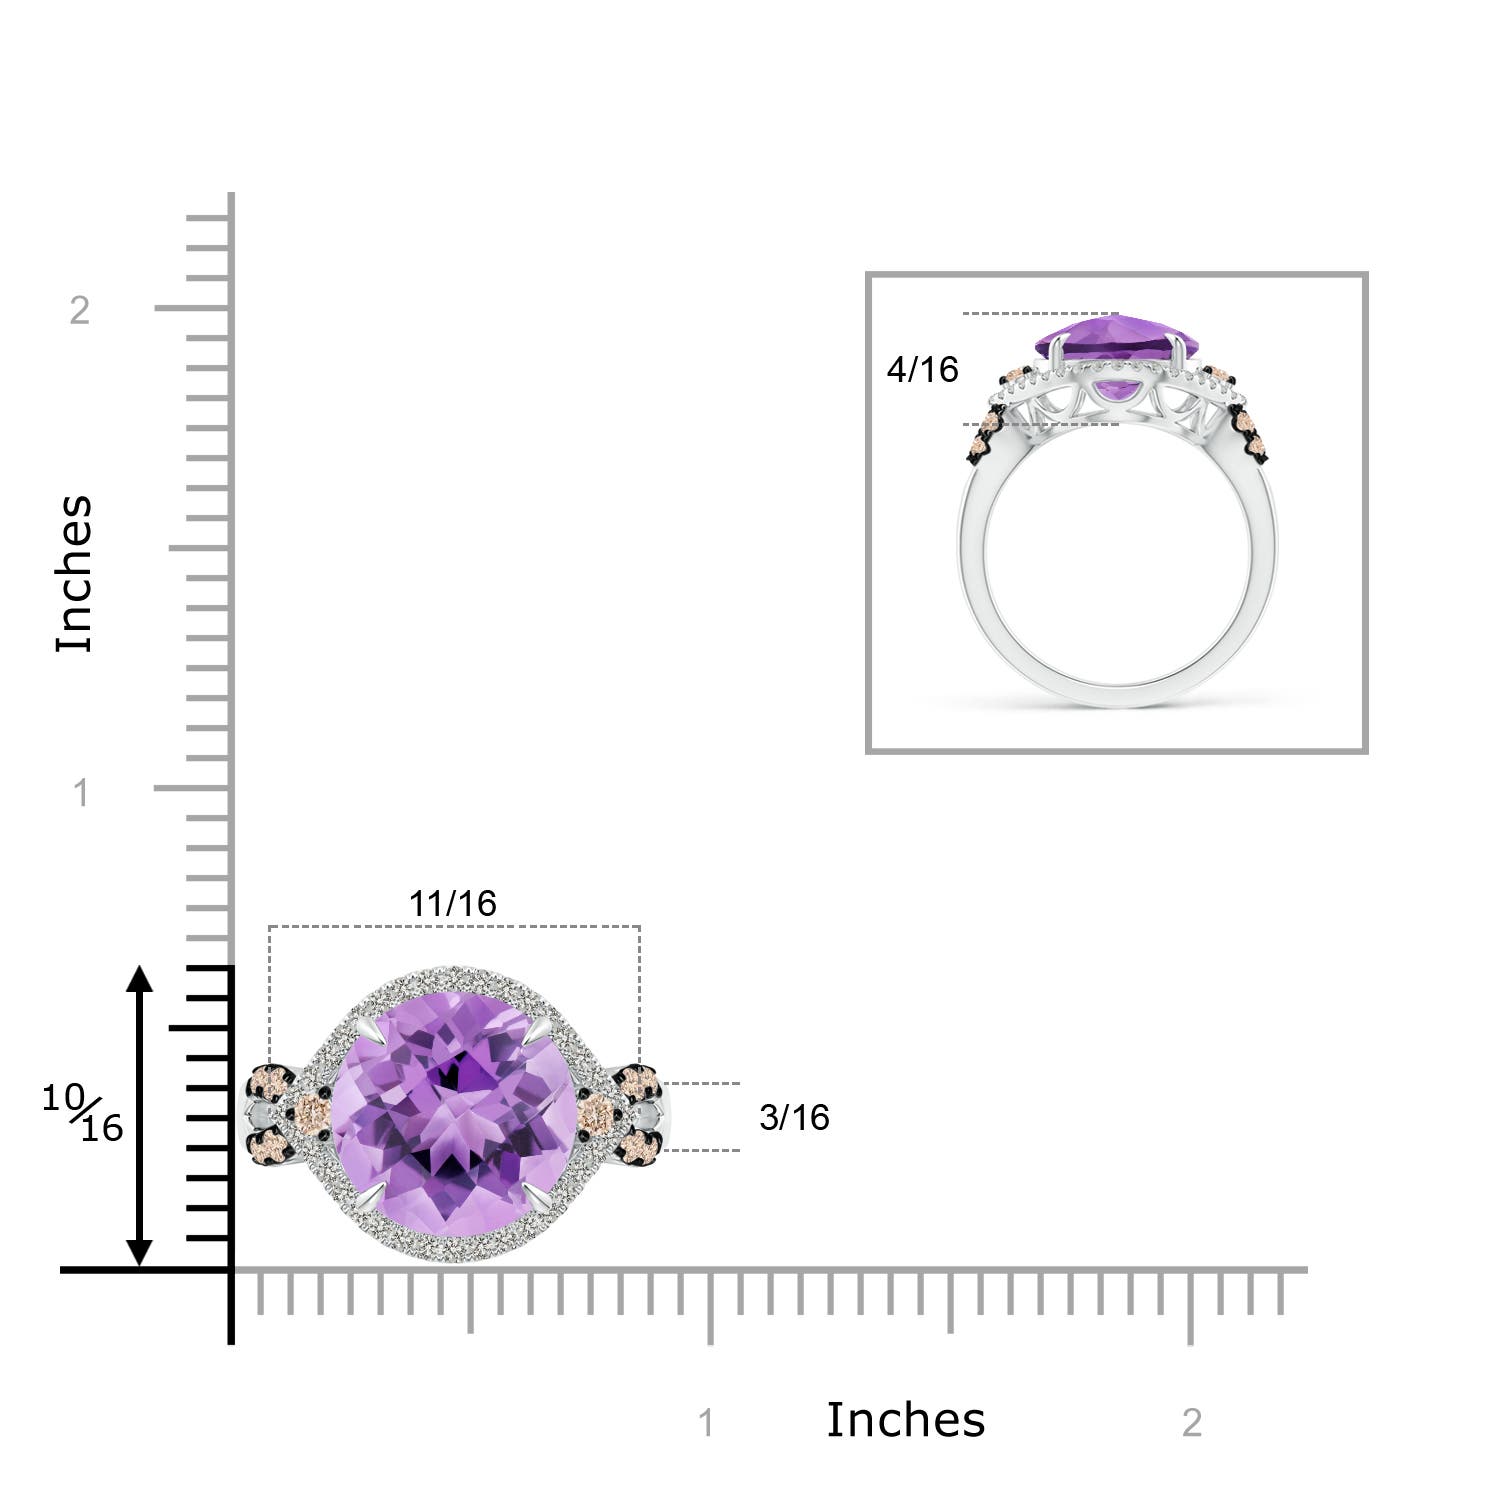 A - Amethyst / 6.4 CT / 14 KT White Gold